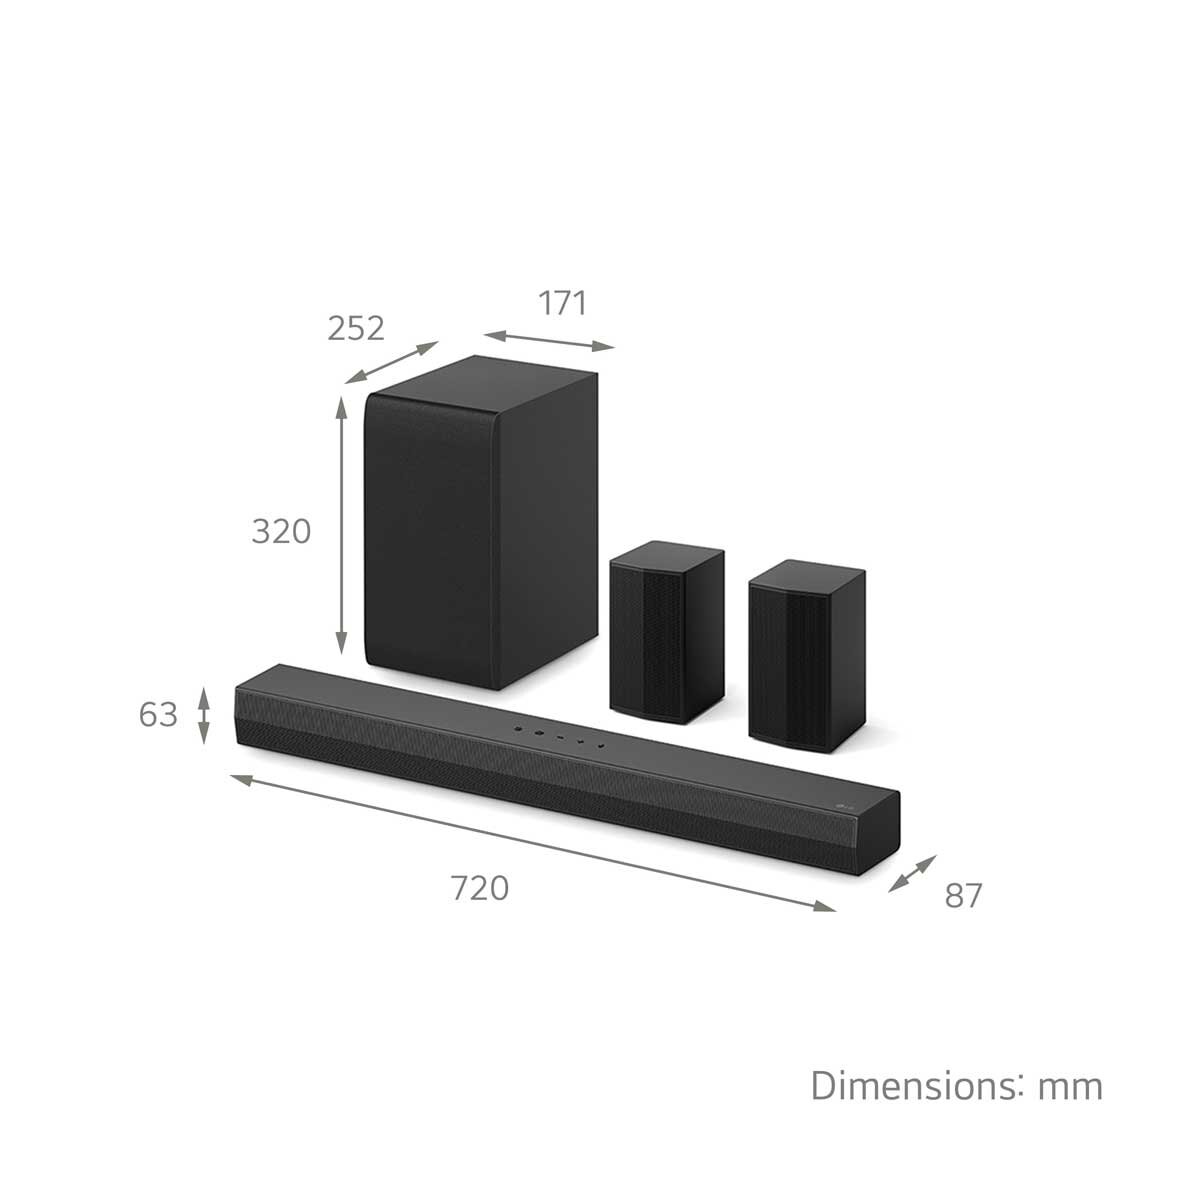 LG 4.1 Channel Soundbar and Wireless Subwoofer with Bluetooth US40TR 